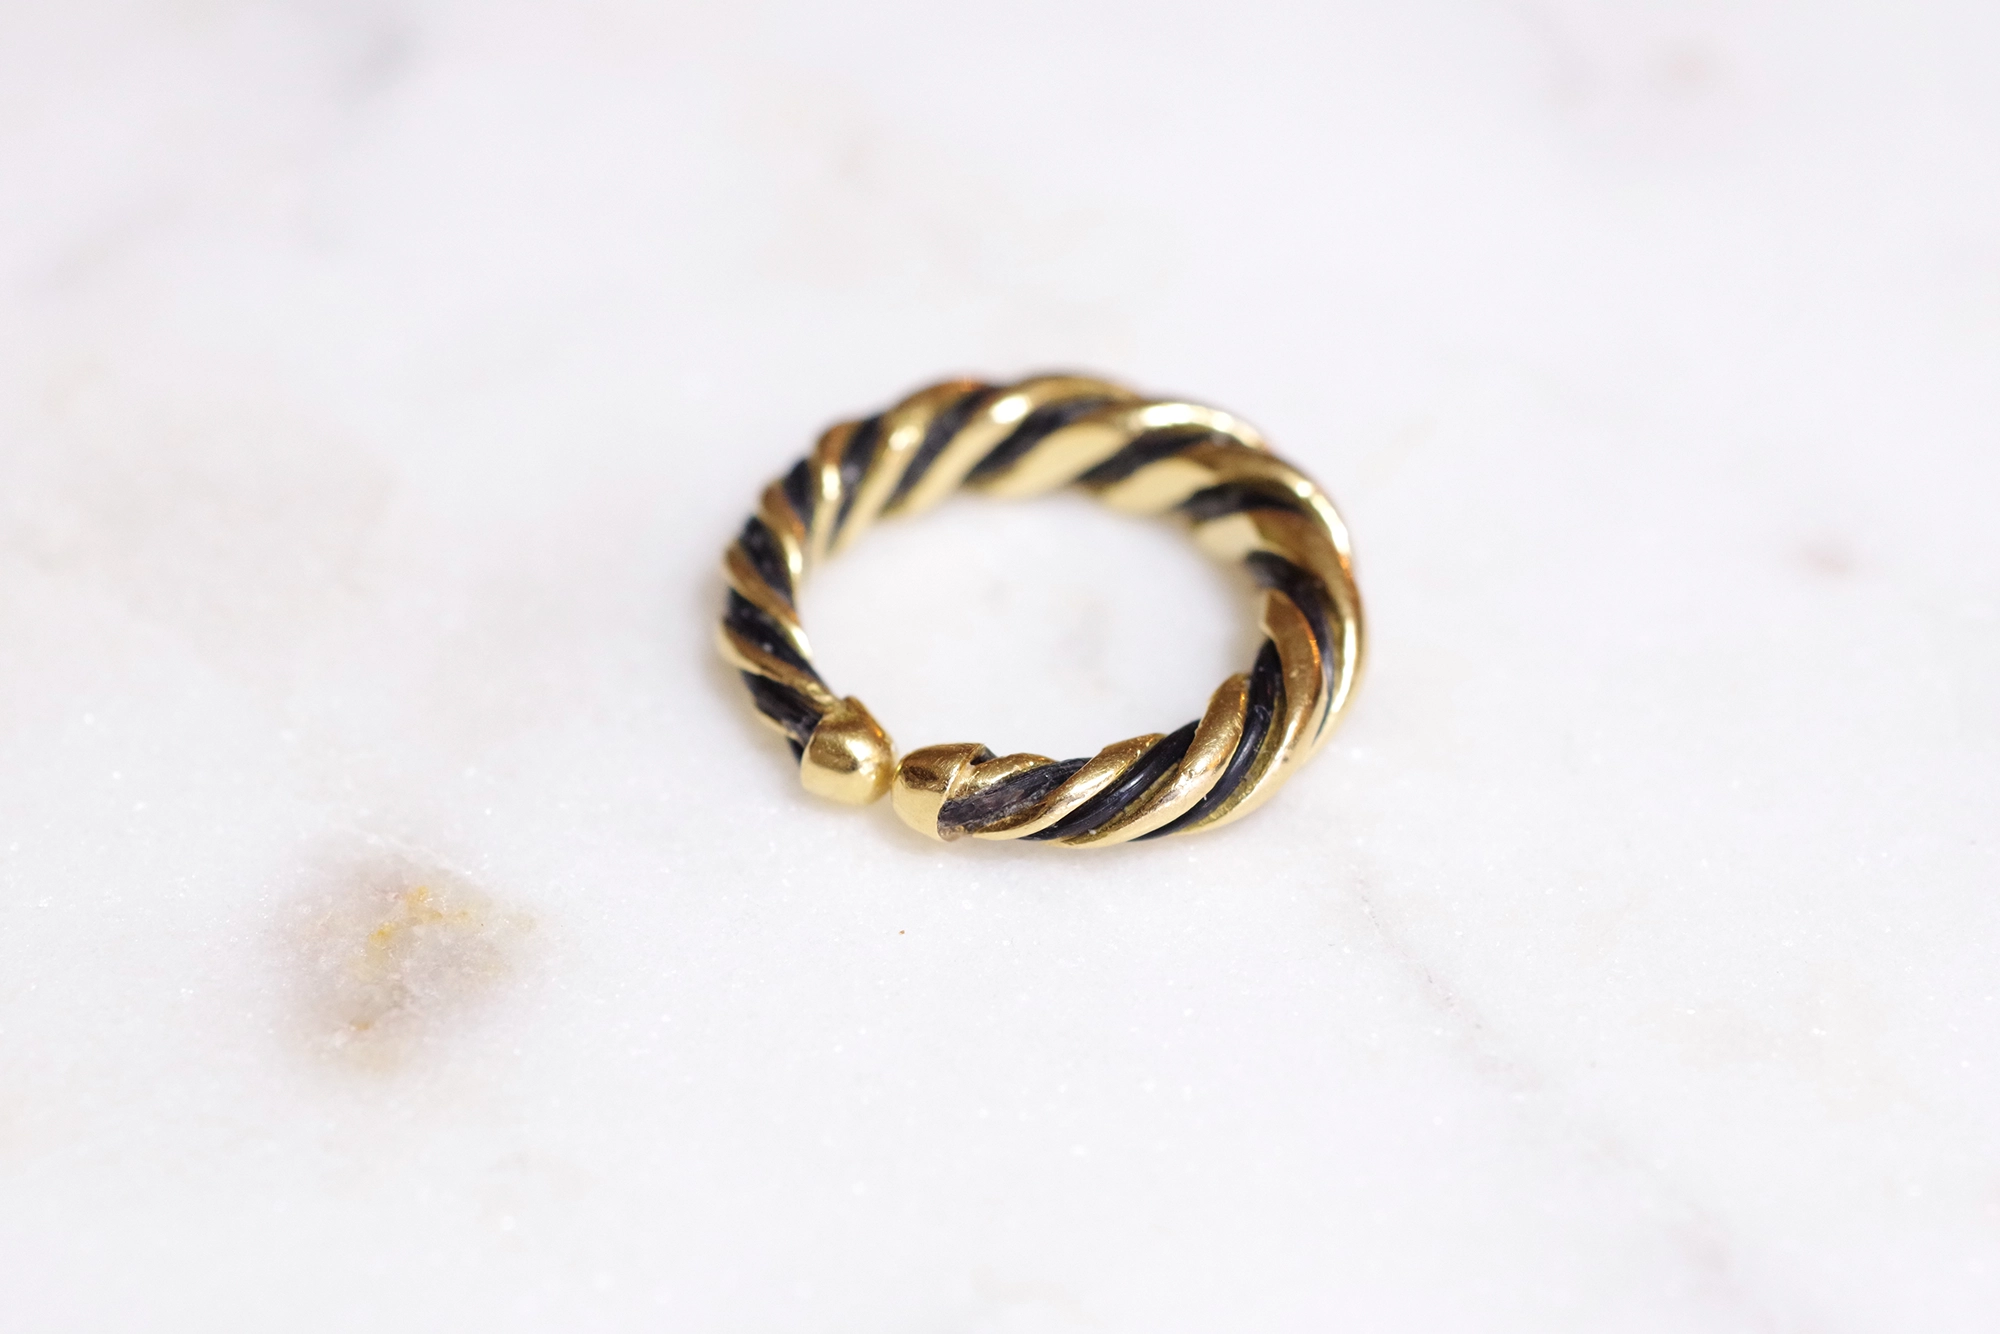 Antique Victorian Elephant Hair Ring | Mens jewelry bracelet, Gold rings  fashion, Elephant hair jewelry